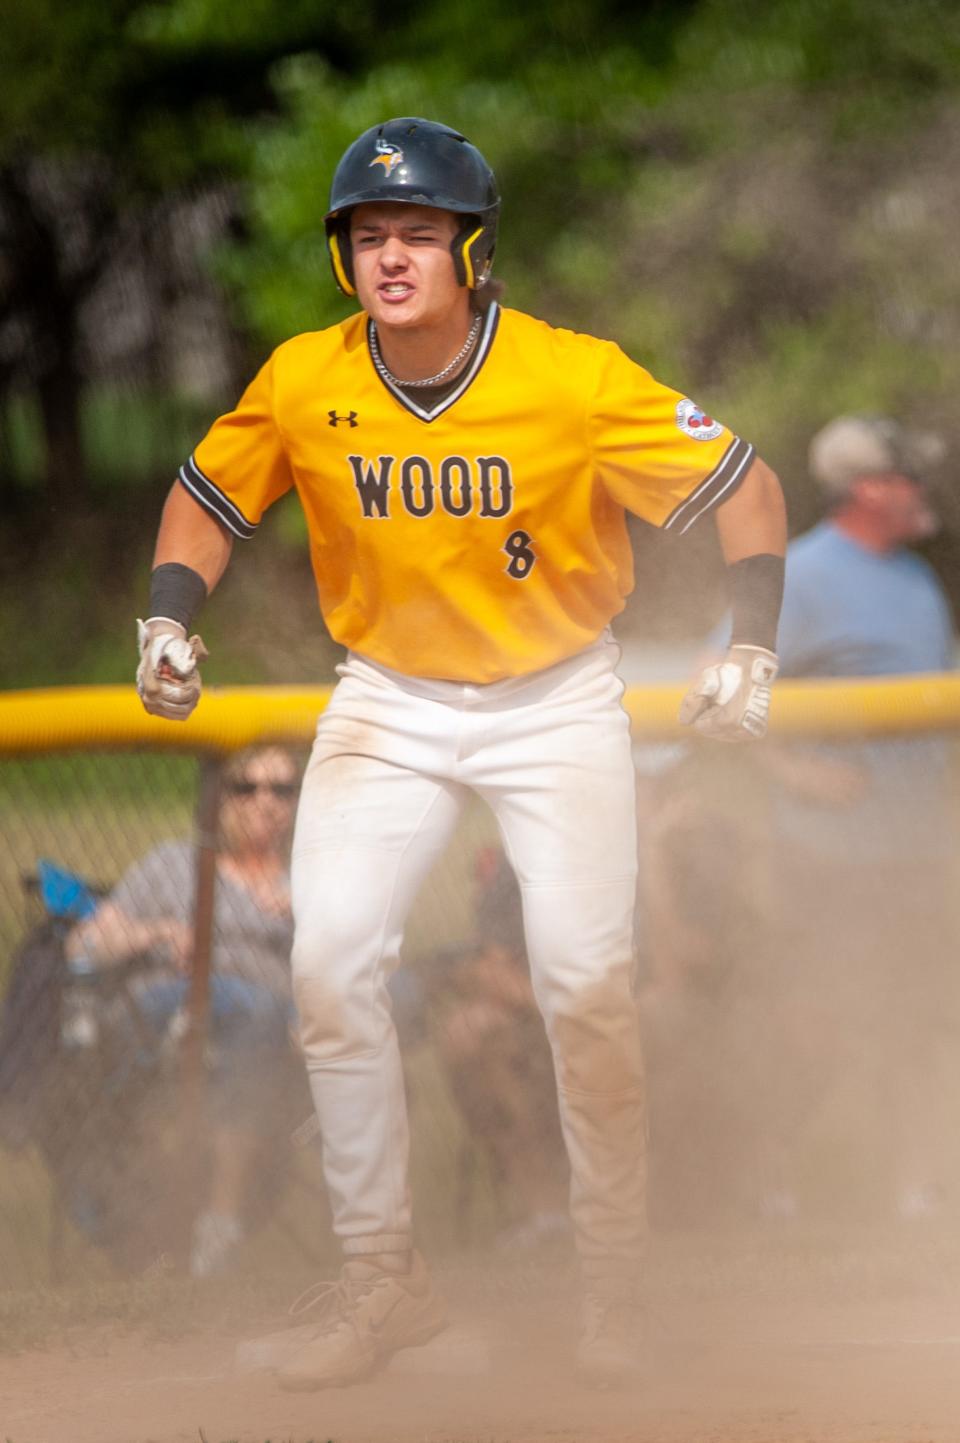 Archbishop Wood's Patrick Gozdan reacts after reaching third base during the Vikings' nine-run first inning in a 15-5 PIAA state playoff win over Pope John Paul II on Monday.